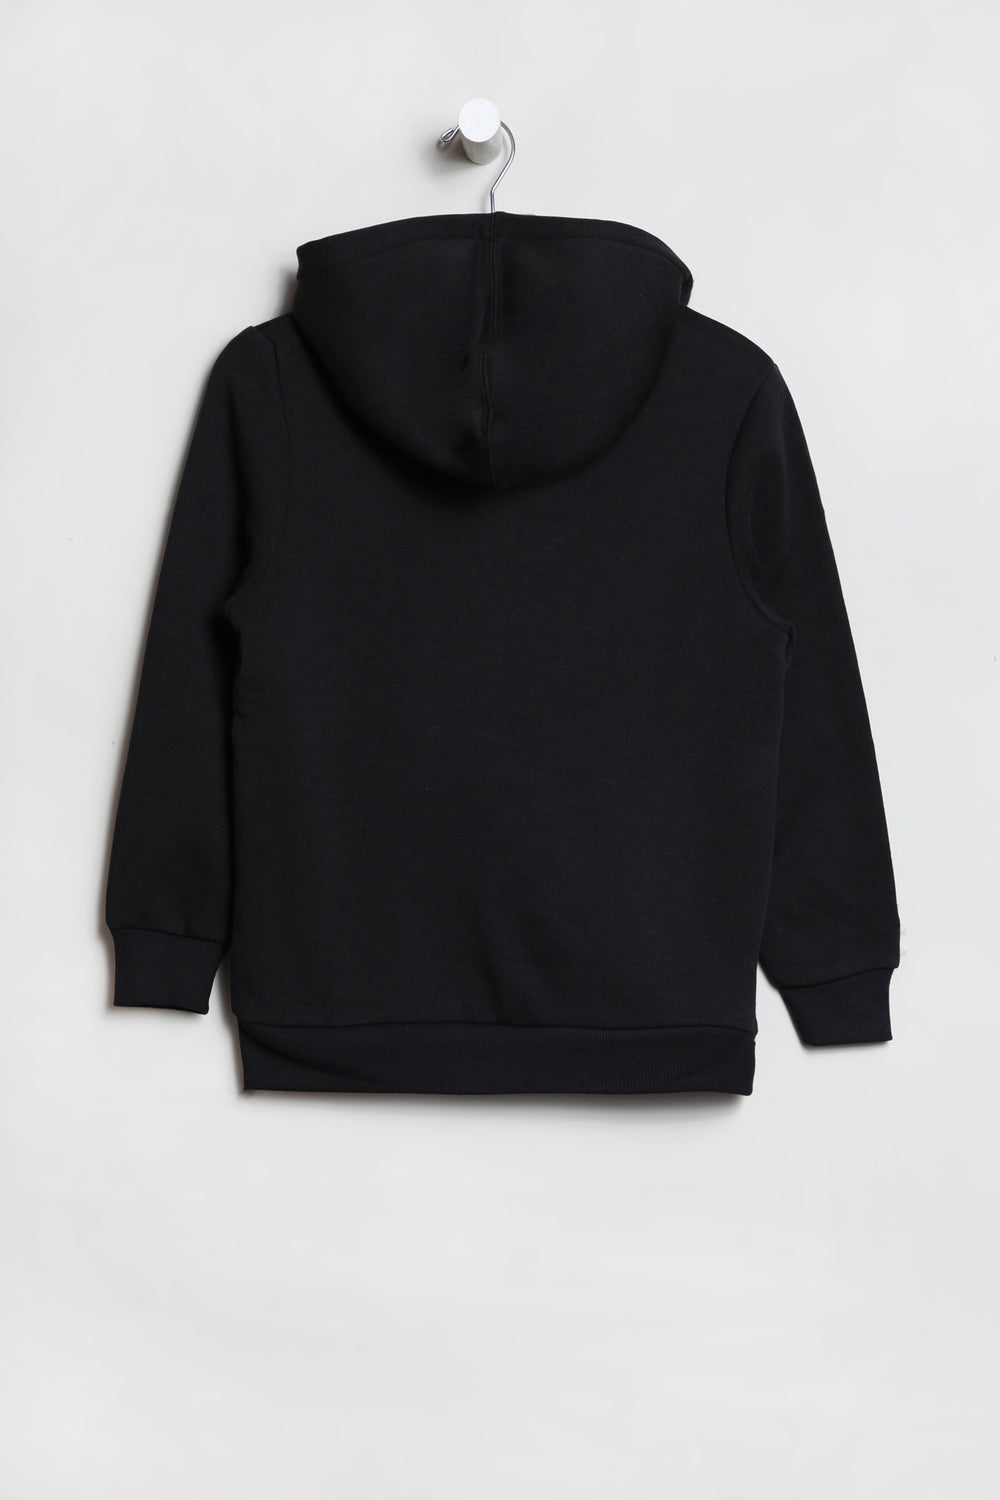 West49 Youth Sherpa Lined Zip-Up Hoodie Black